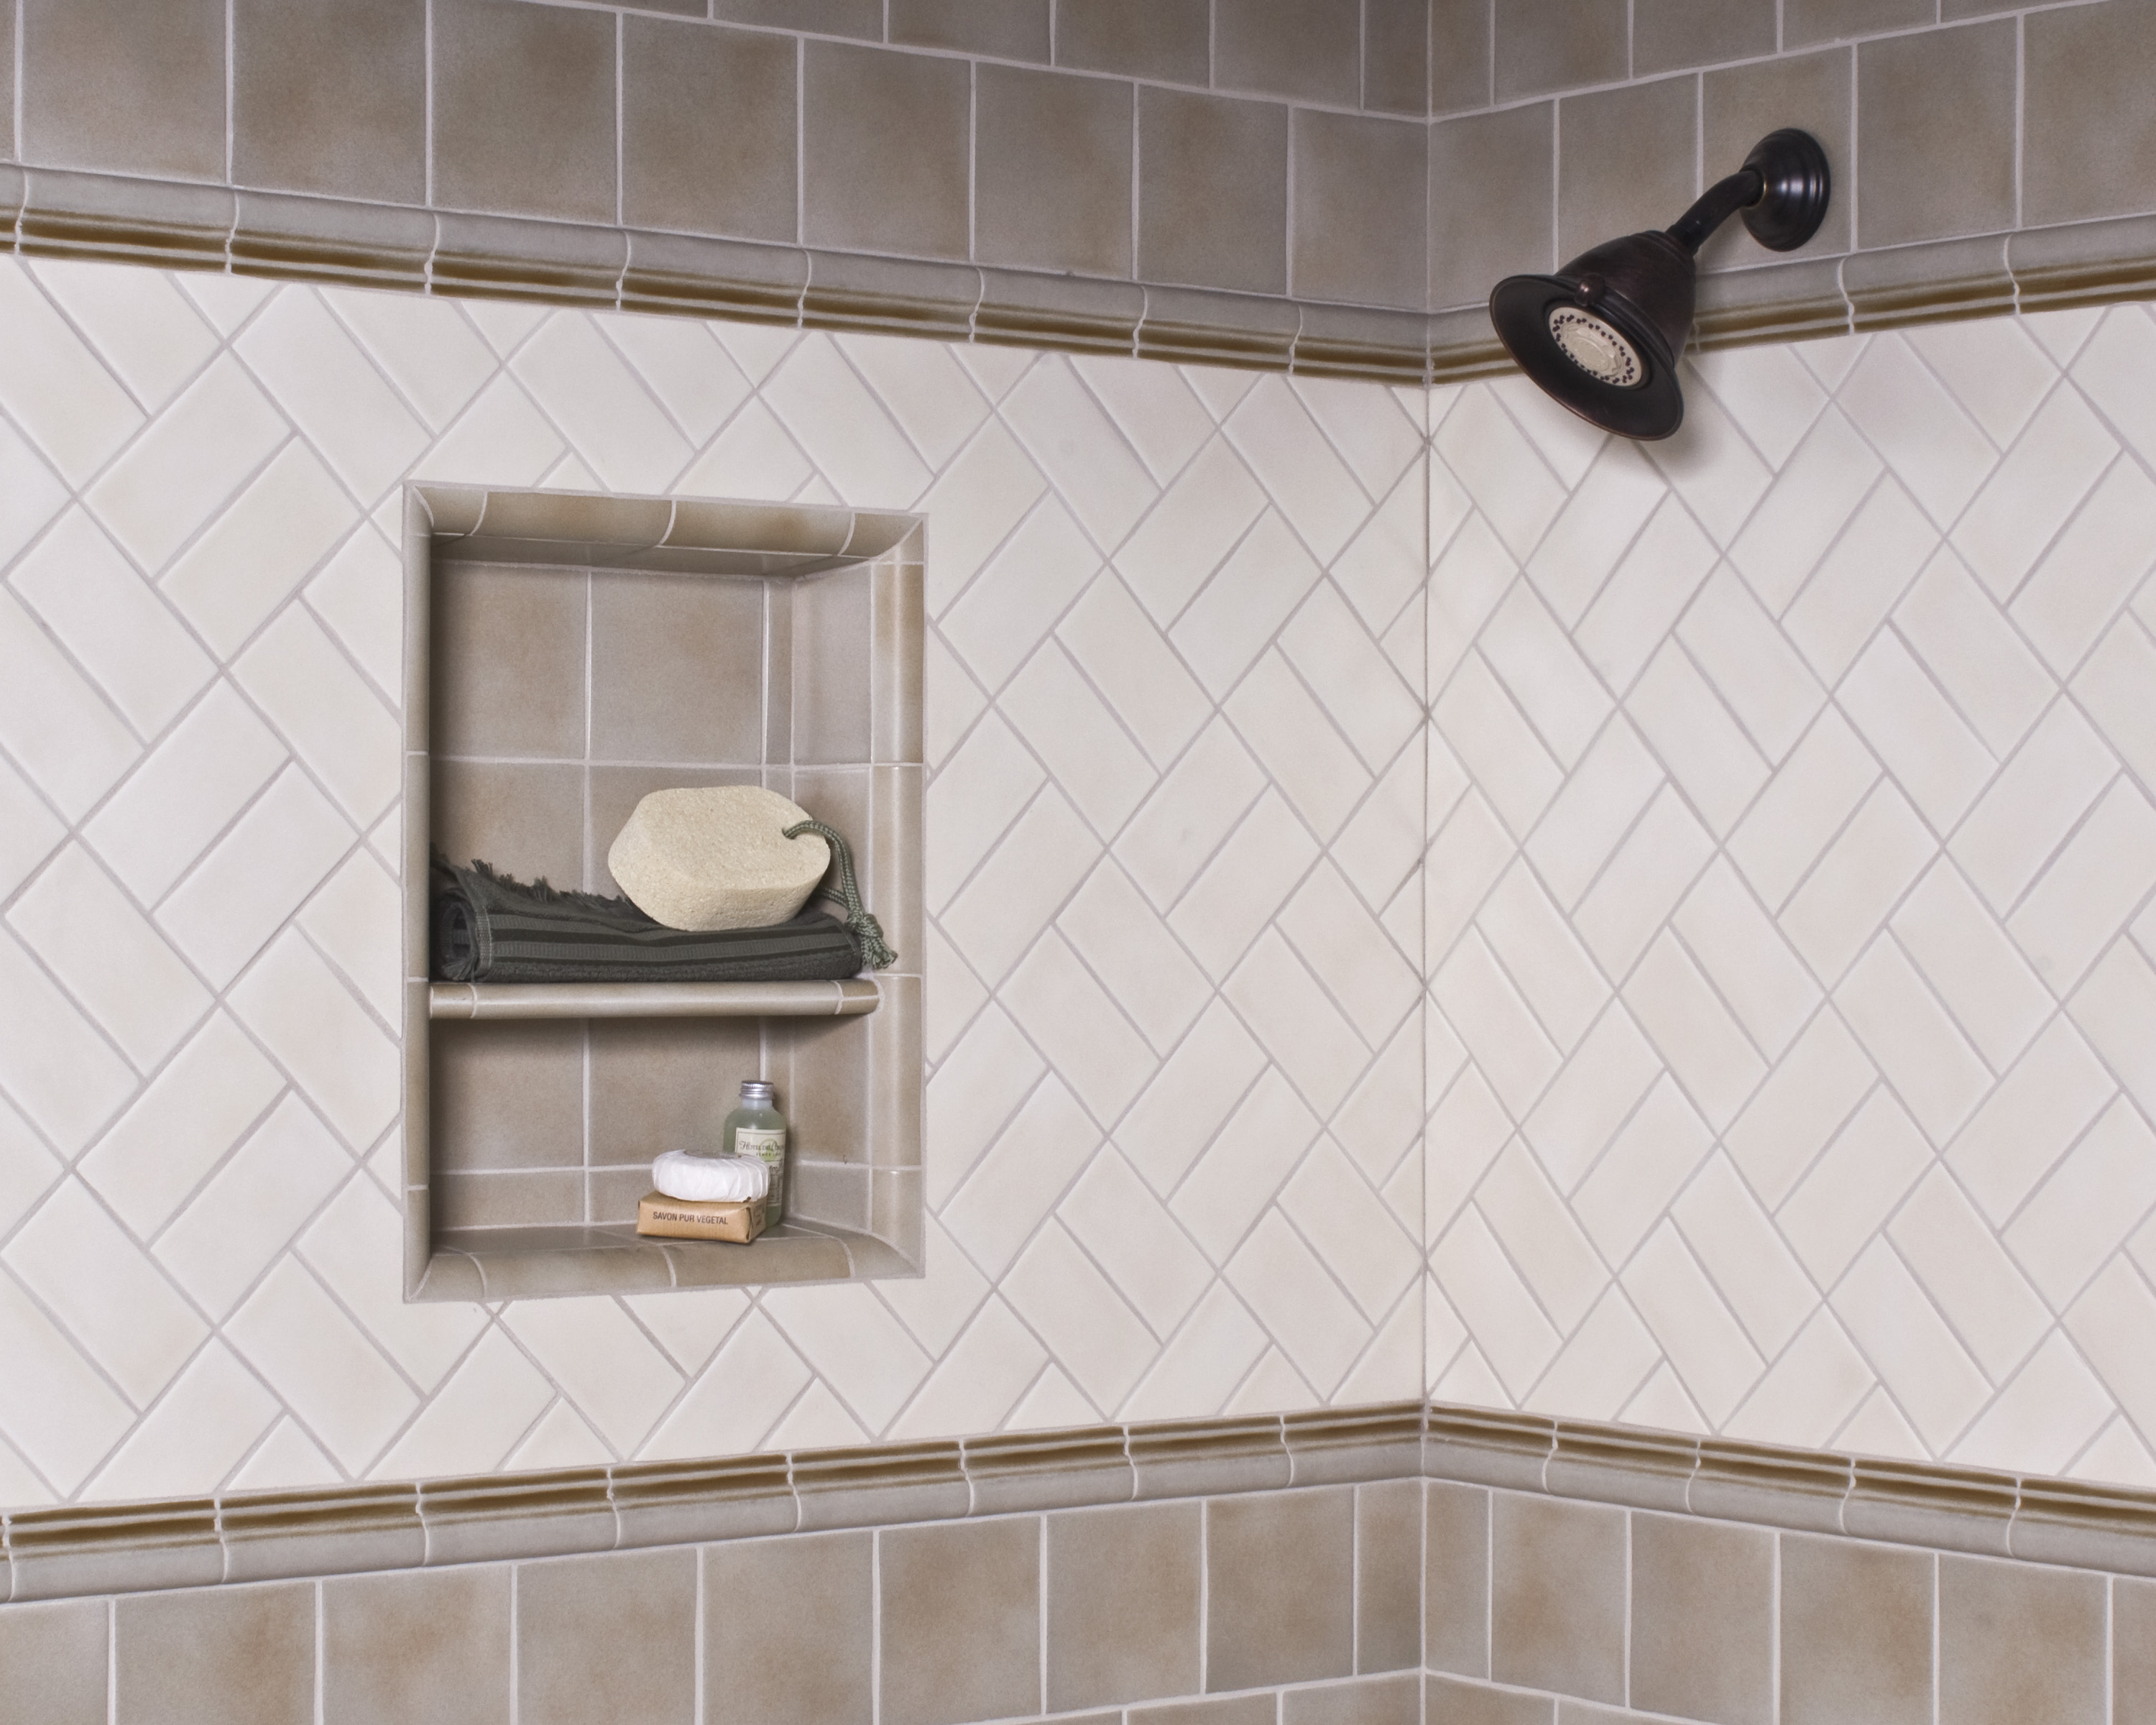 Tile for a Waterproof Shower Niche